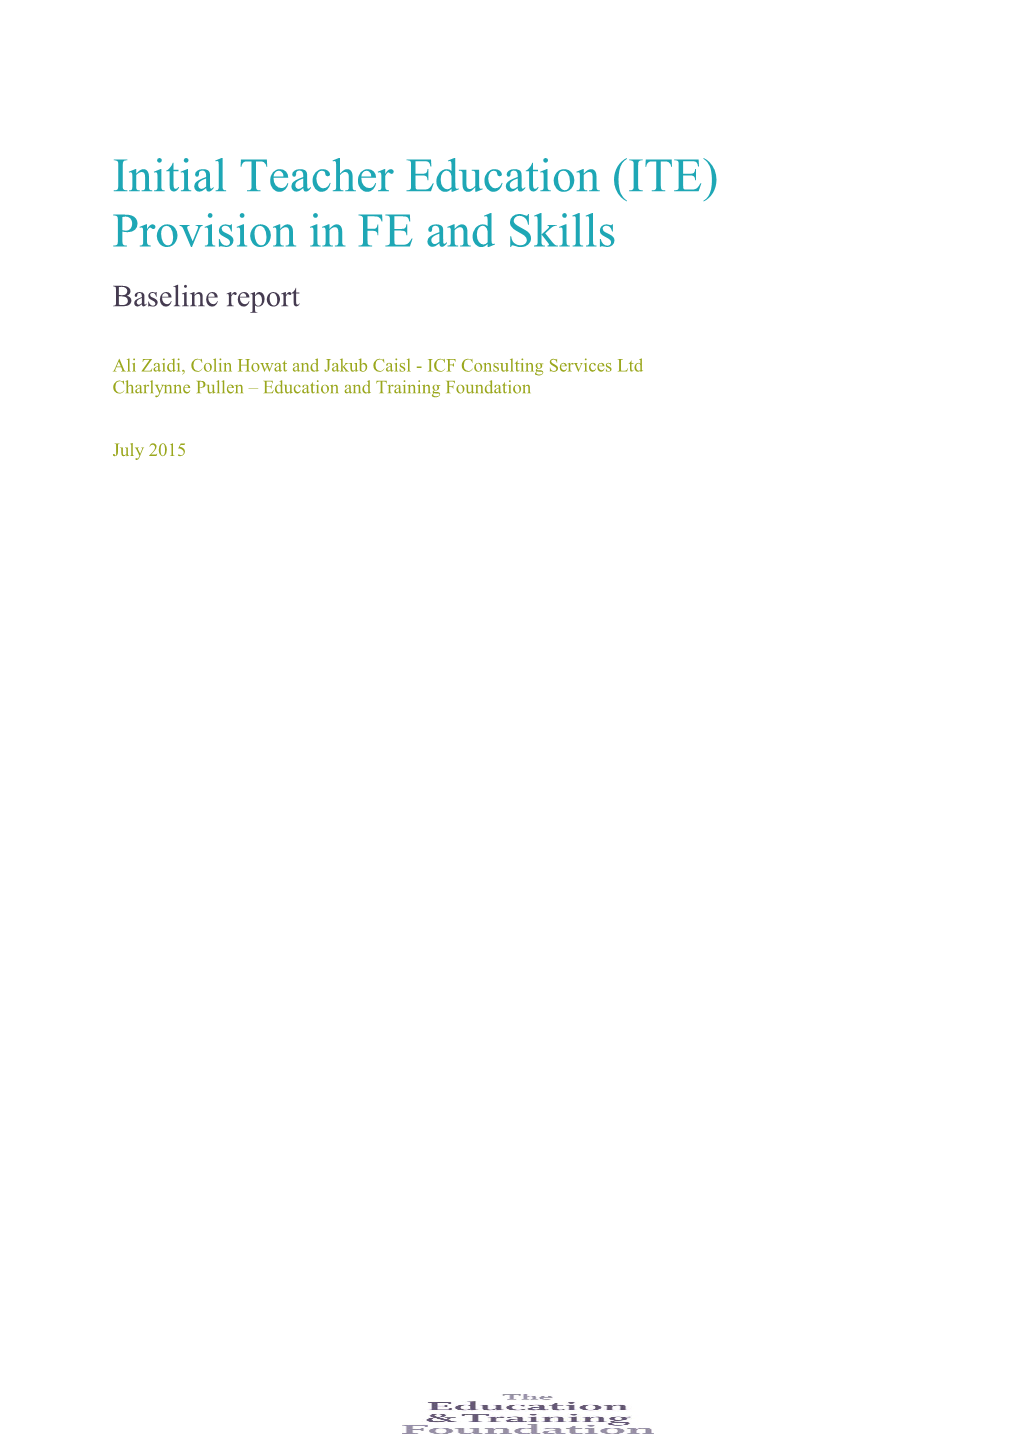 Initial Teacher Education (ITE) Provision in FE and Skills